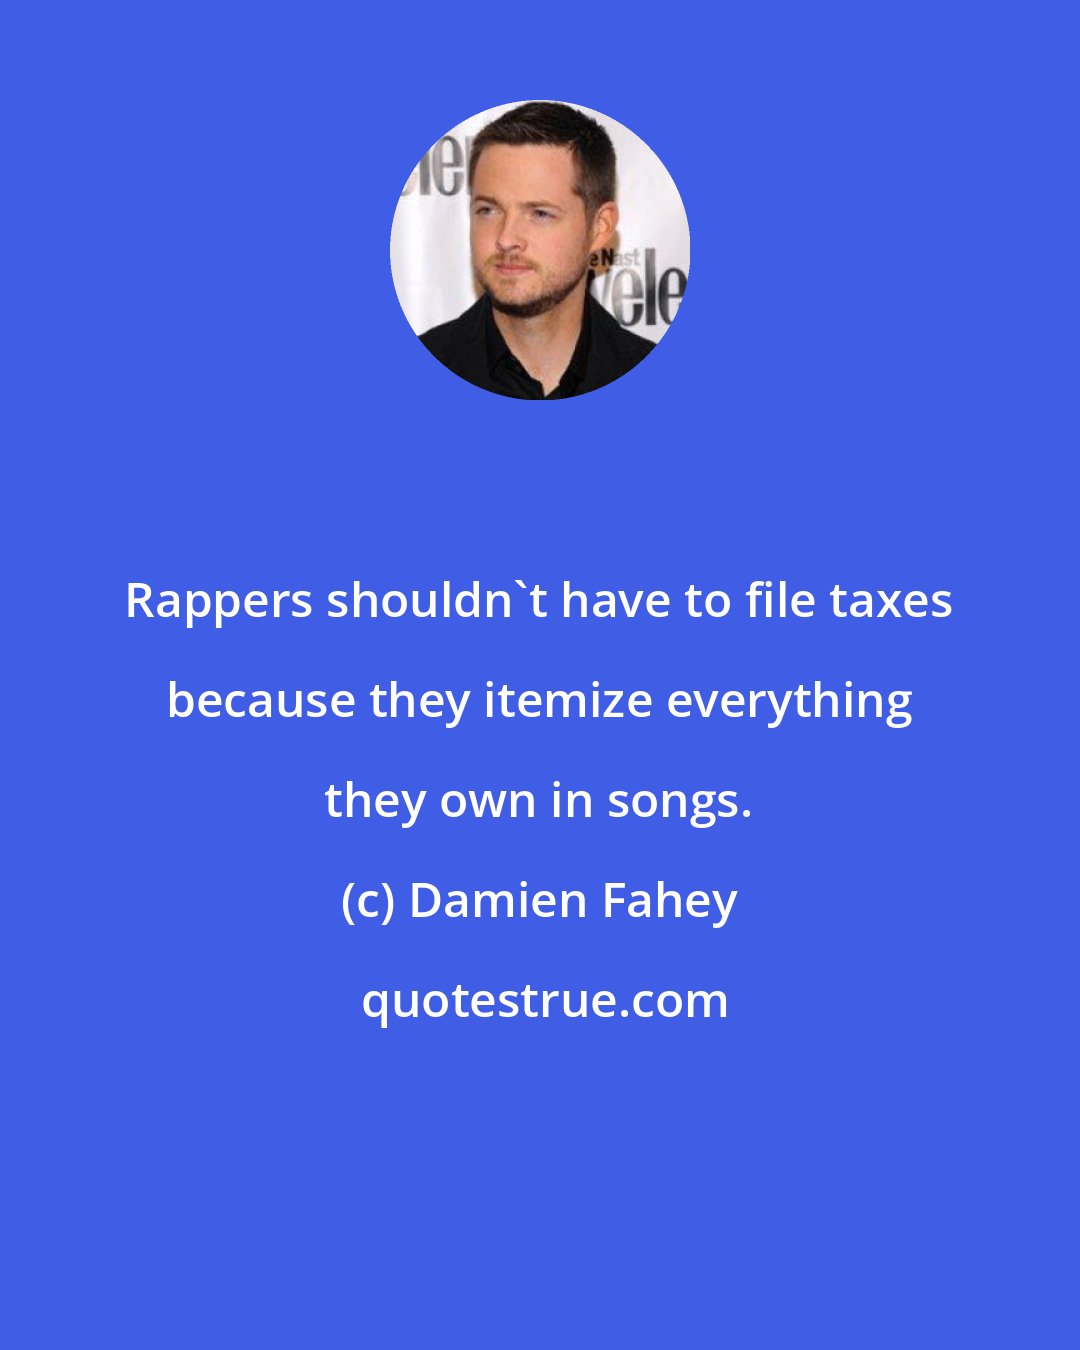 Damien Fahey: Rappers shouldn't have to file taxes because they itemize everything they own in songs.